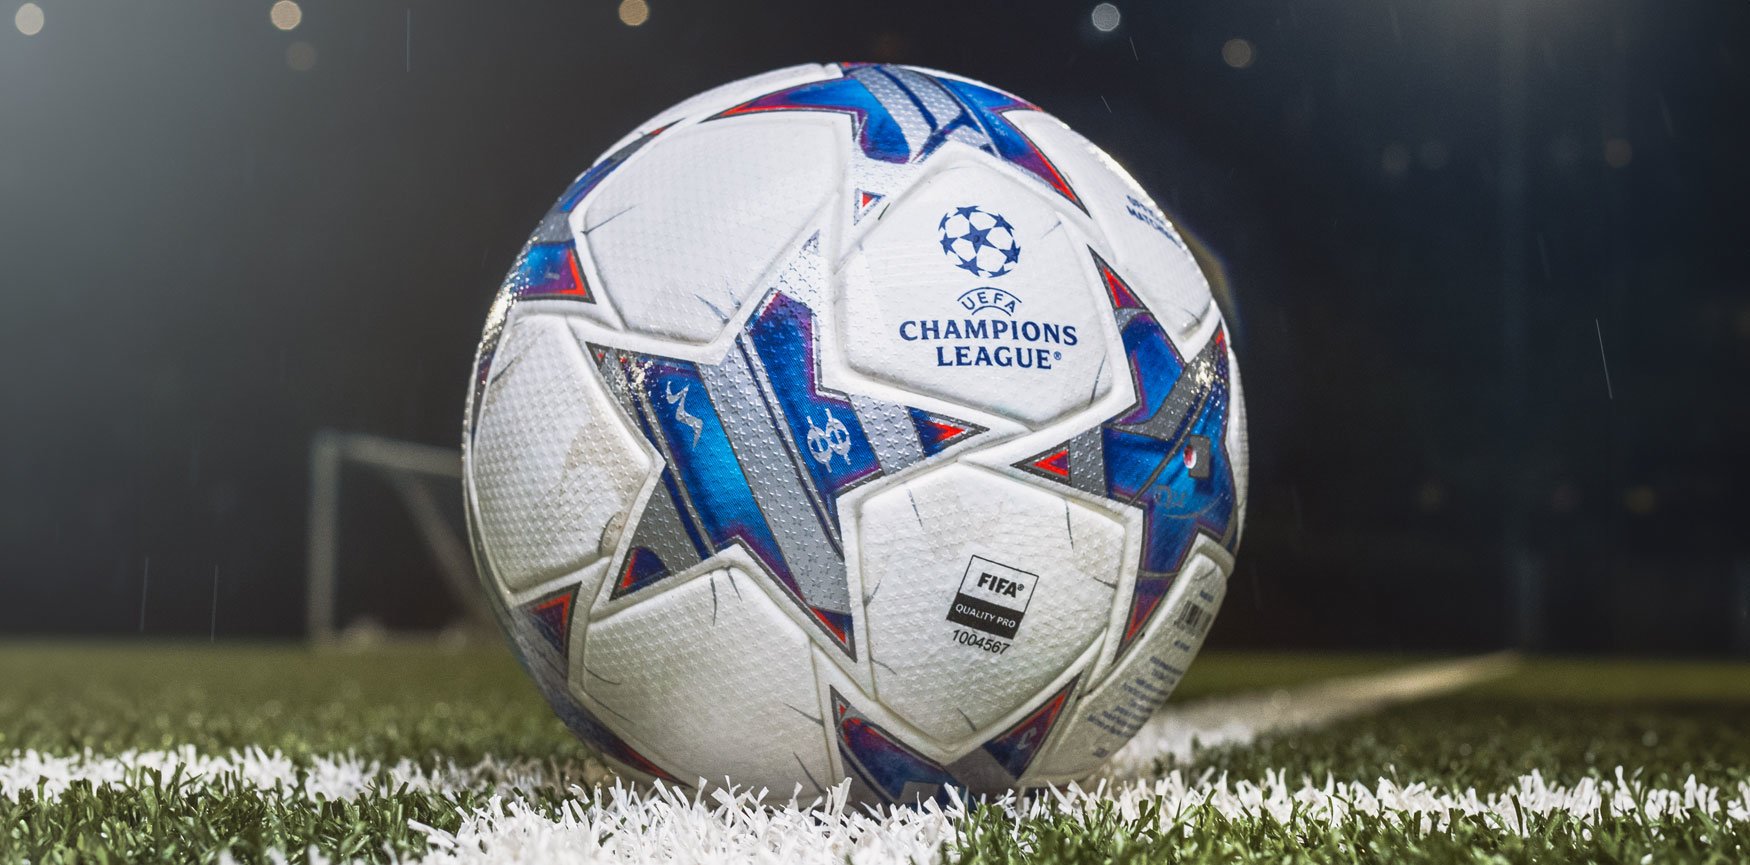 Match Footballs featuring the adidas Champions League Ball for 2024